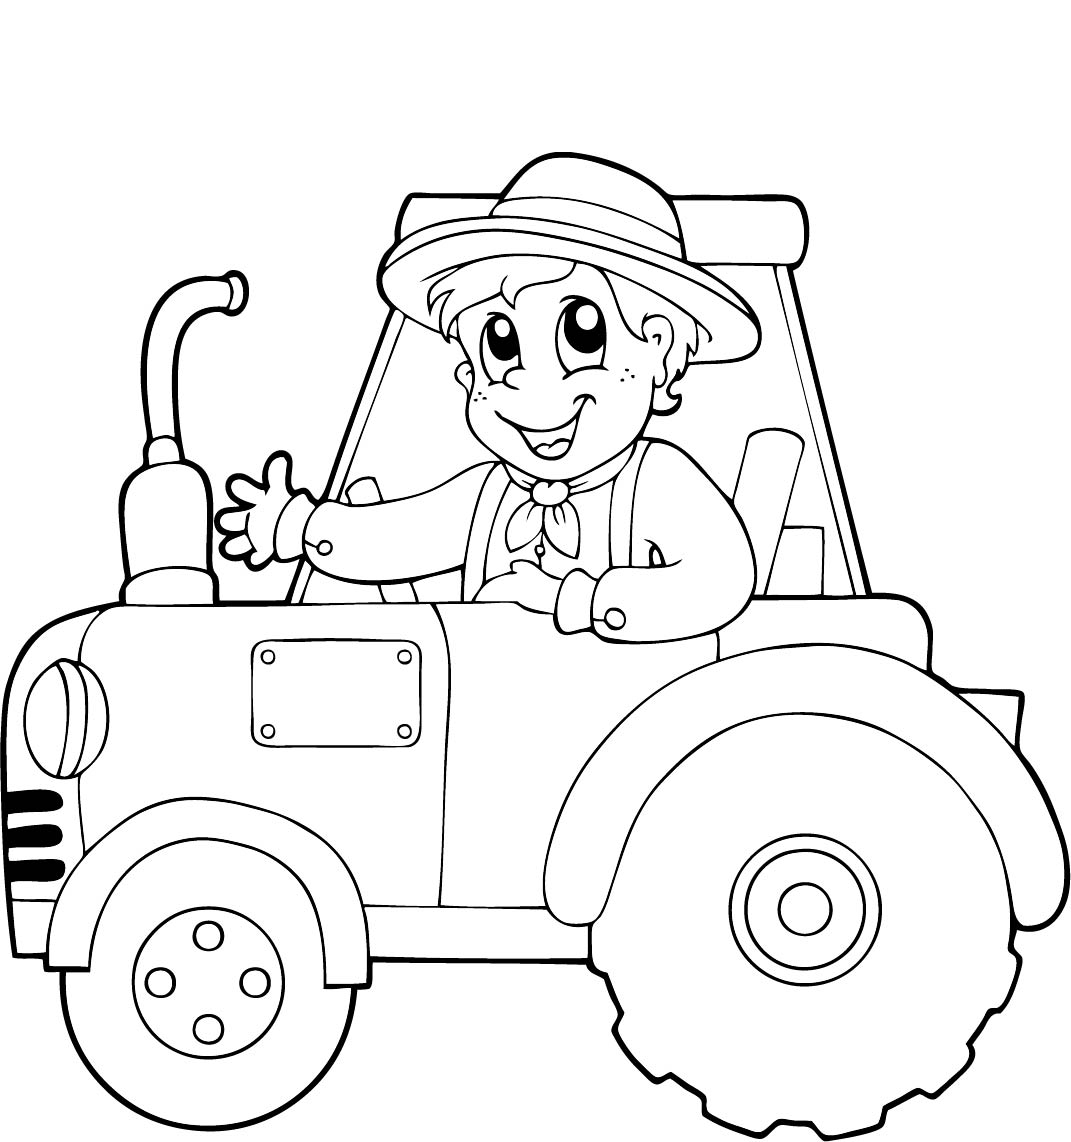 Coloring book farmer on tractor – Online Coloring Page – HiColoring.com